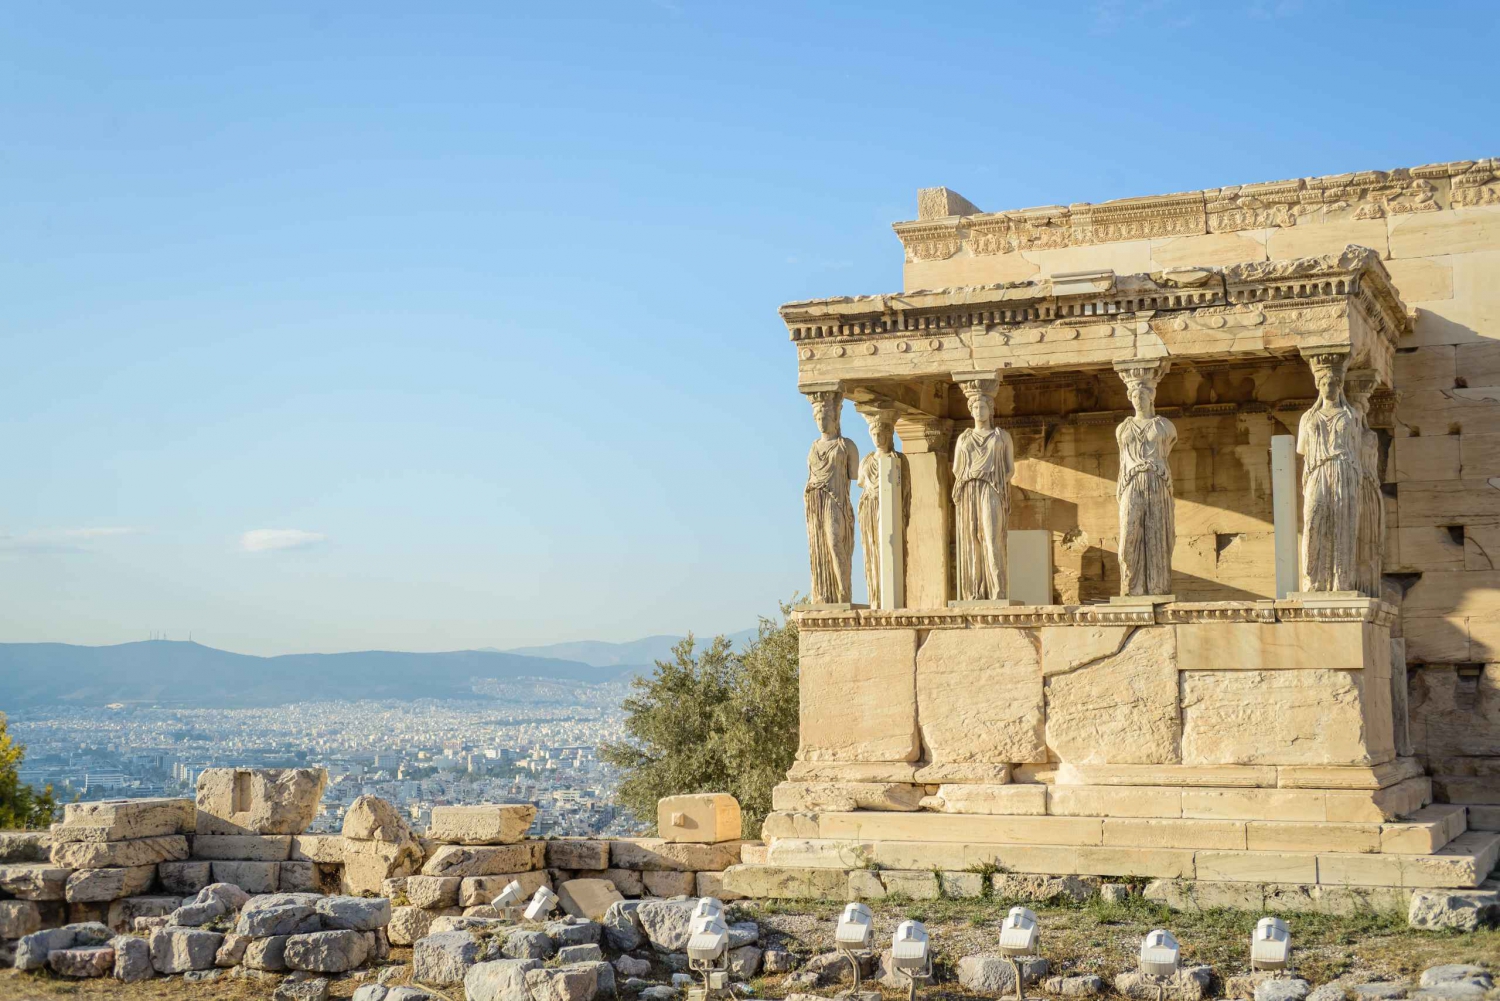 Acropolis: Entrance Ticket and Guided Walking Tour